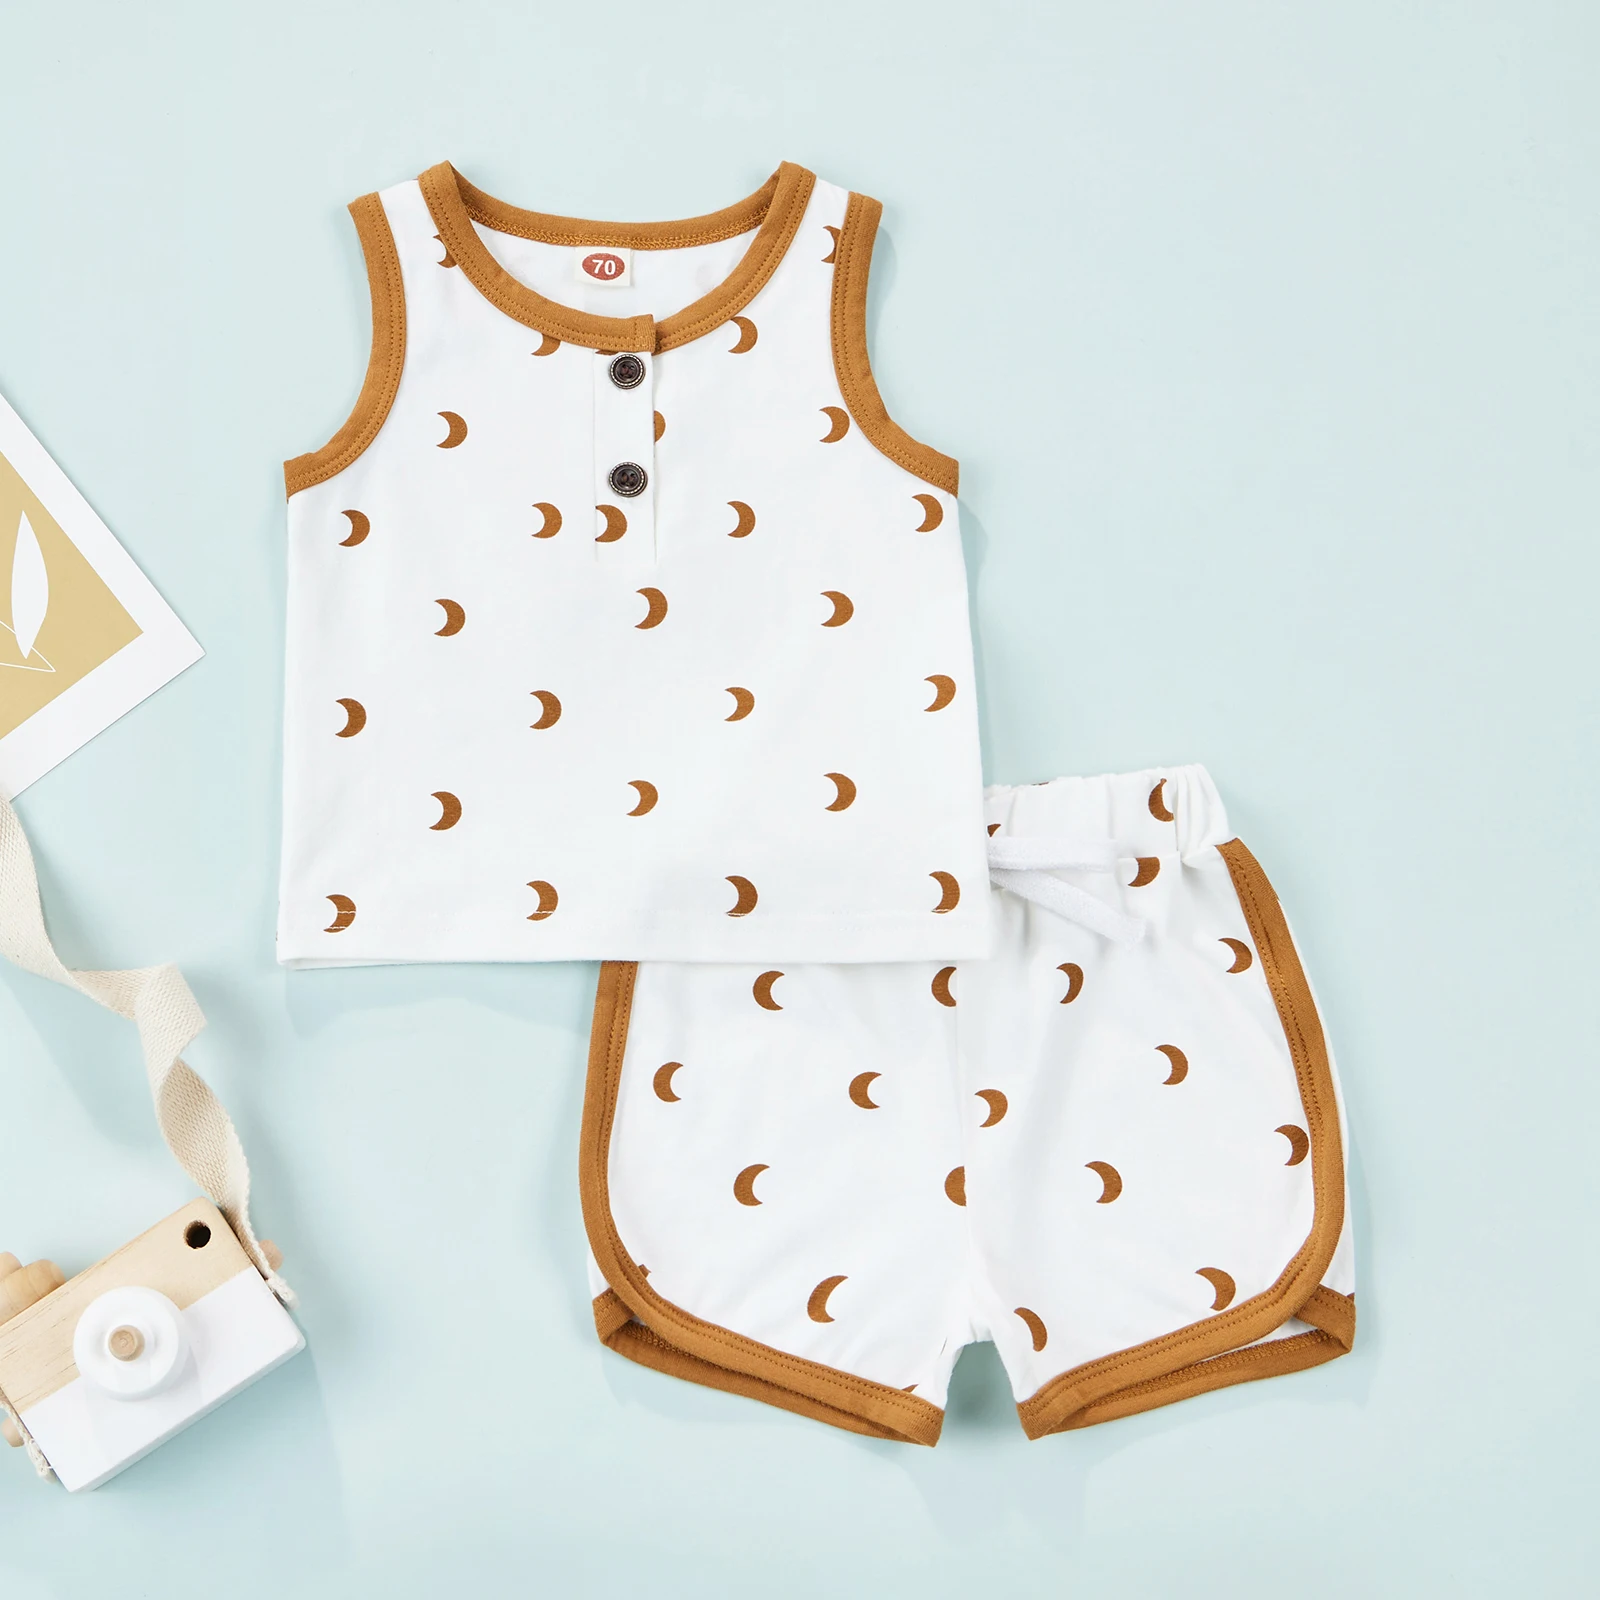 2022 0-24M Infant Girl Boy Clothes Set Casual Summer Moon Print Sleeveless Round Neck Top Vest+Shorts Loose Cotton Outfits 2pcs newborn baby clothing gift set